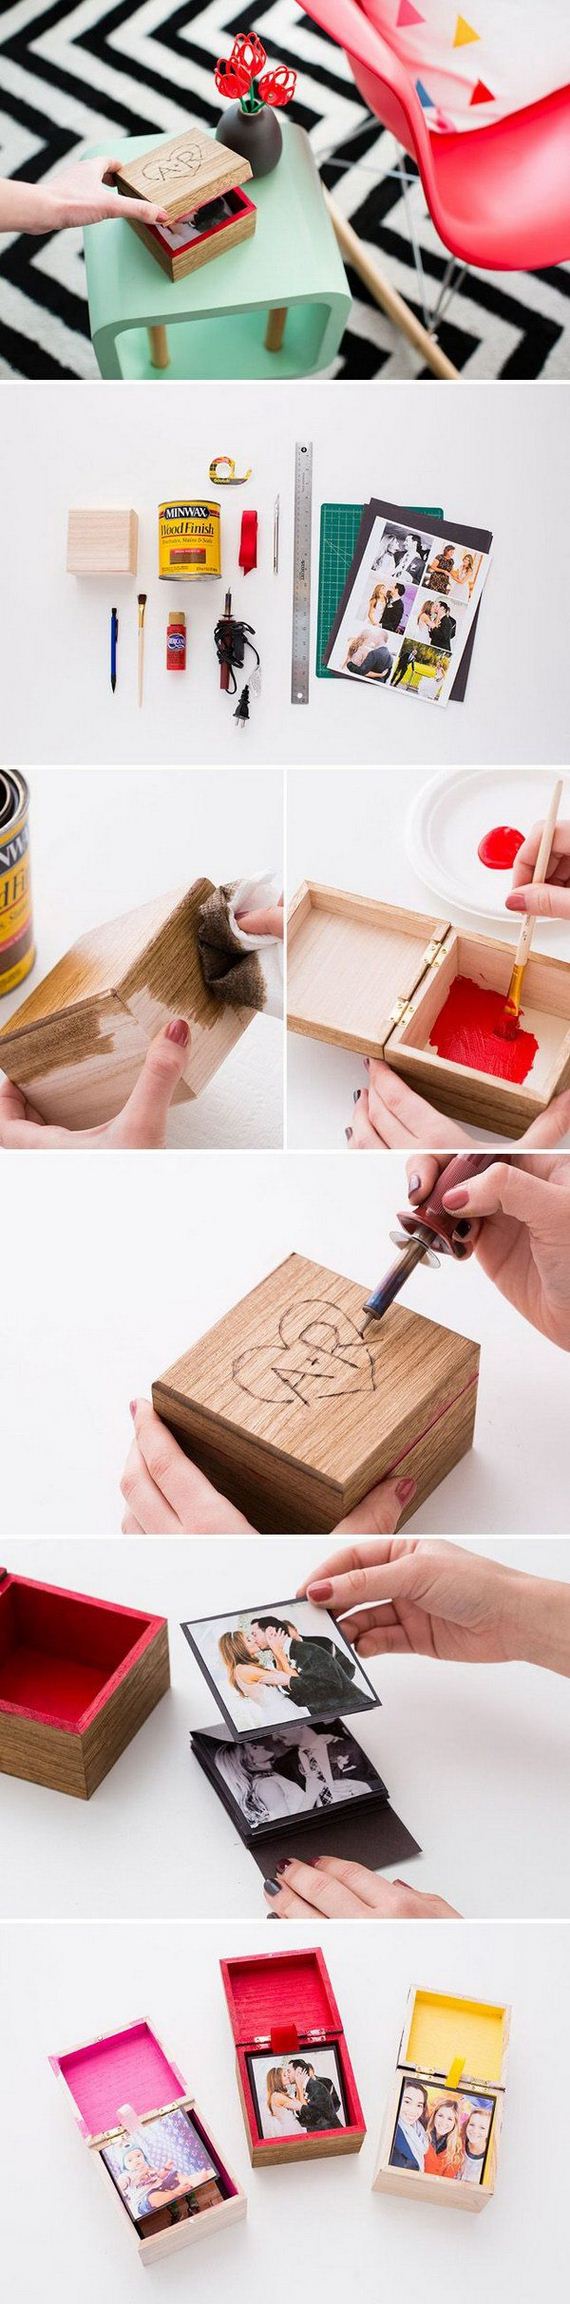 18-diy-personalized-gift-ideas